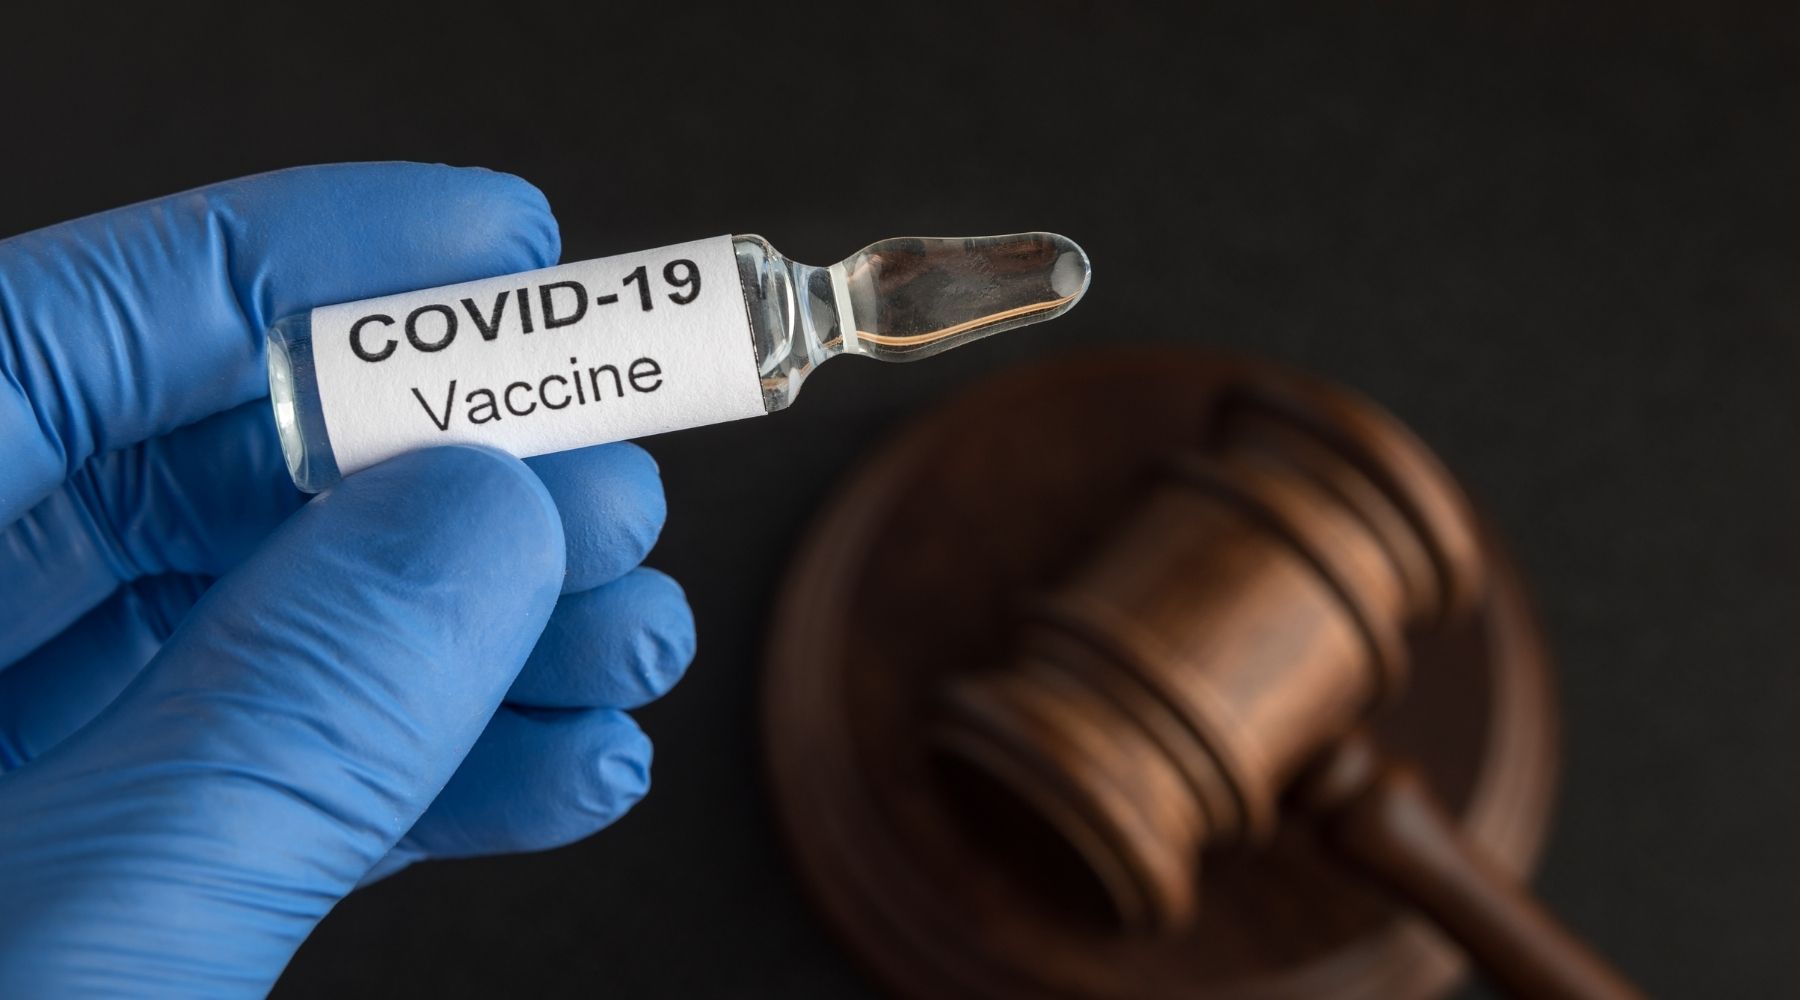 Mandatory COVID-19 Vaccination Policies in Ontario Long-Term Care Homes